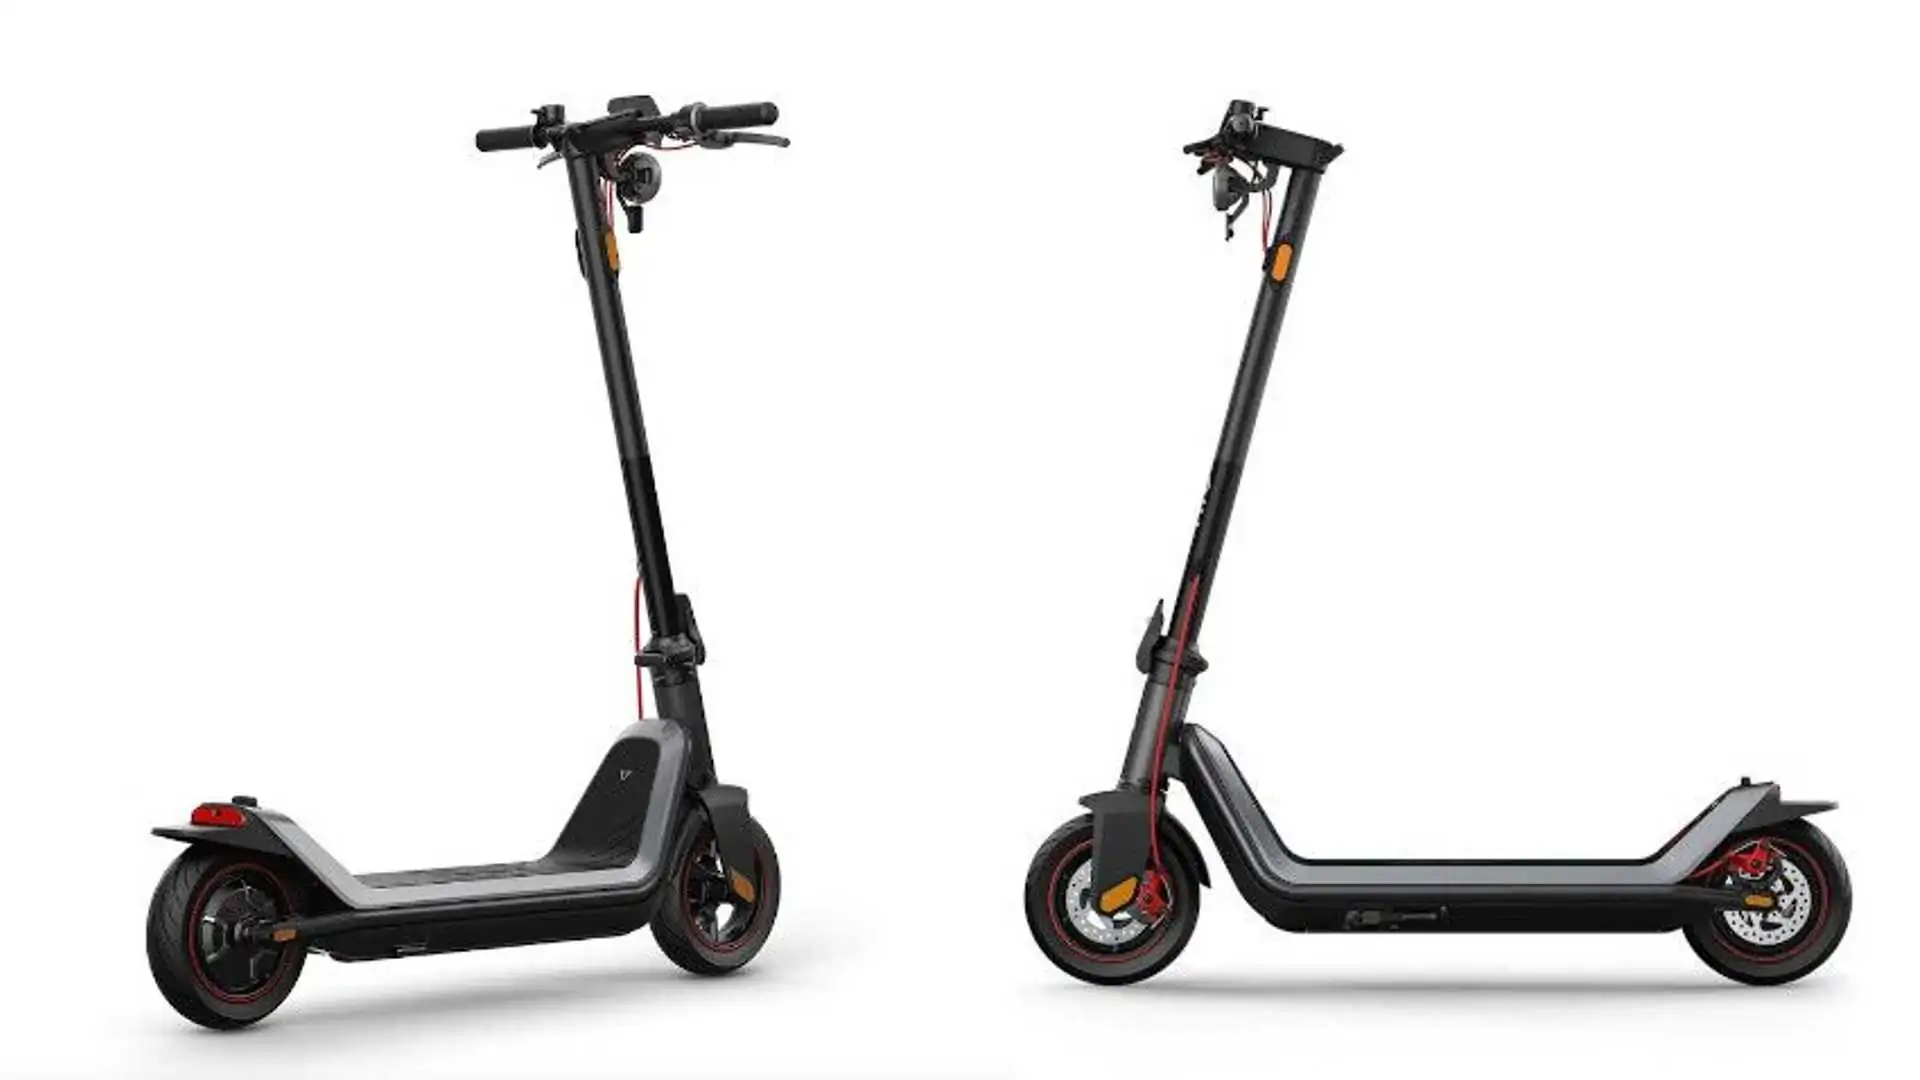 NIU KQi3 Max Electric Scooter With a 66km Range and a Top Speed of 24km/h  Launched - Gizmochina